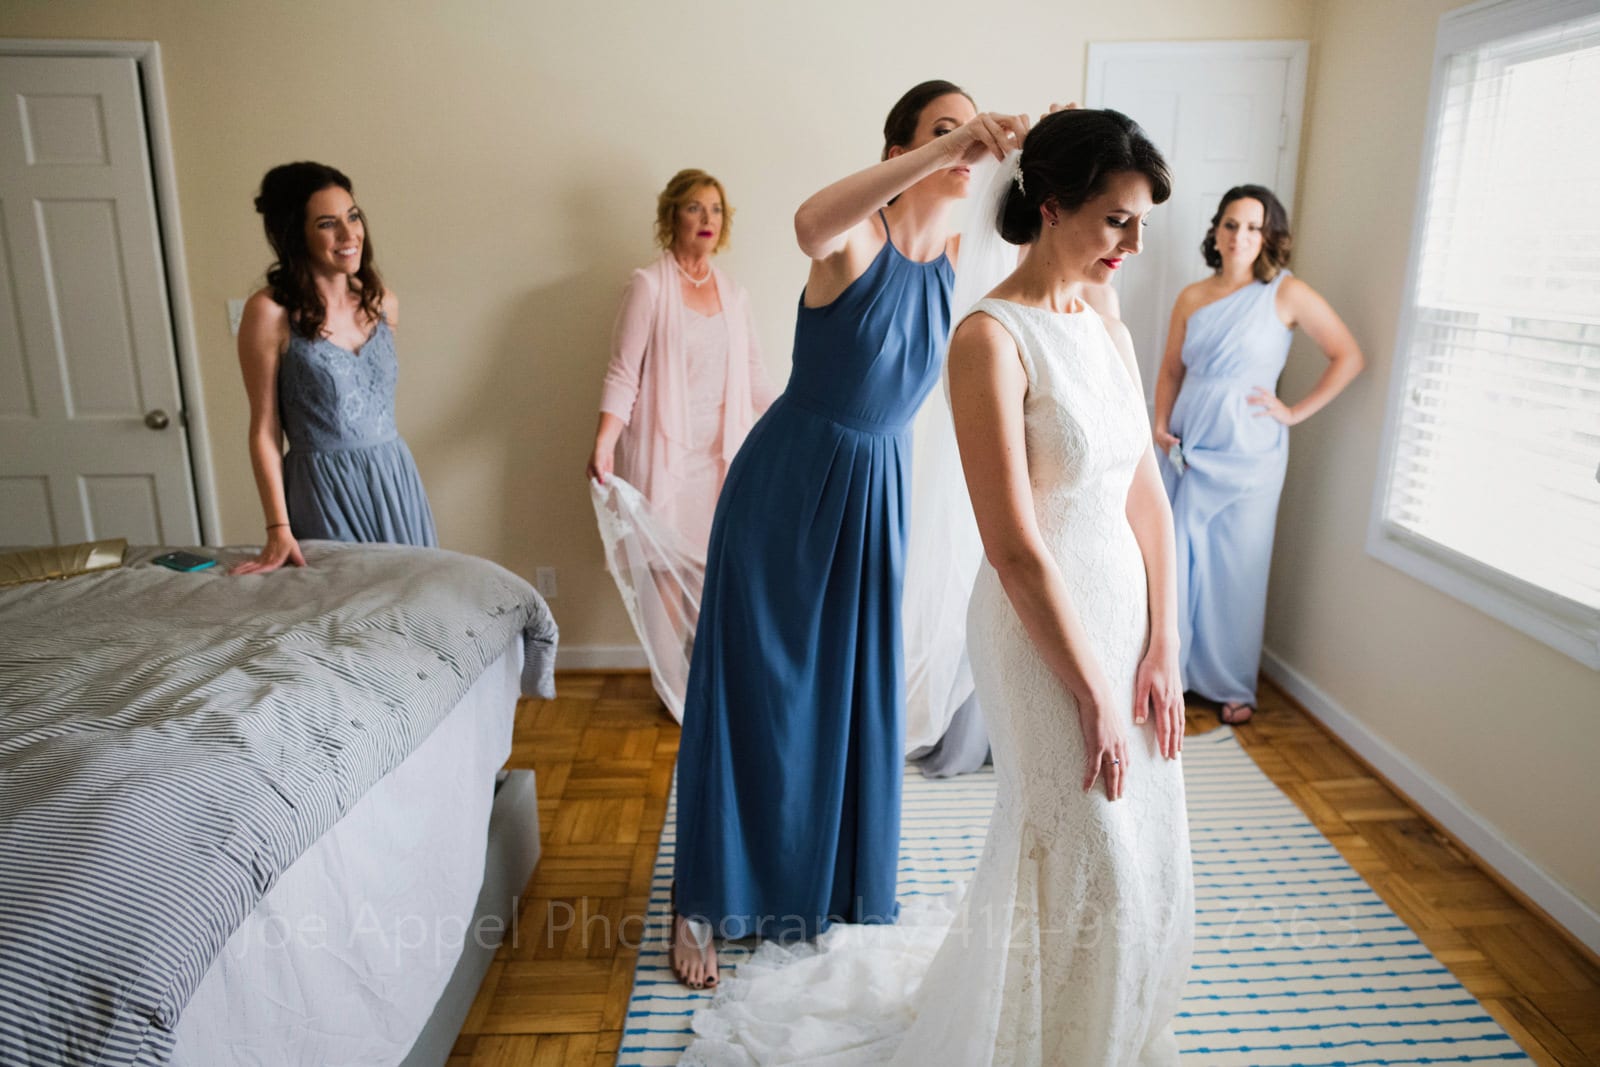 A bride wearing a white gown has her veil put in by a bridesmaid in a blue dress while other bridesmaids wearing blue dresses and her mother in a pink dress look on.